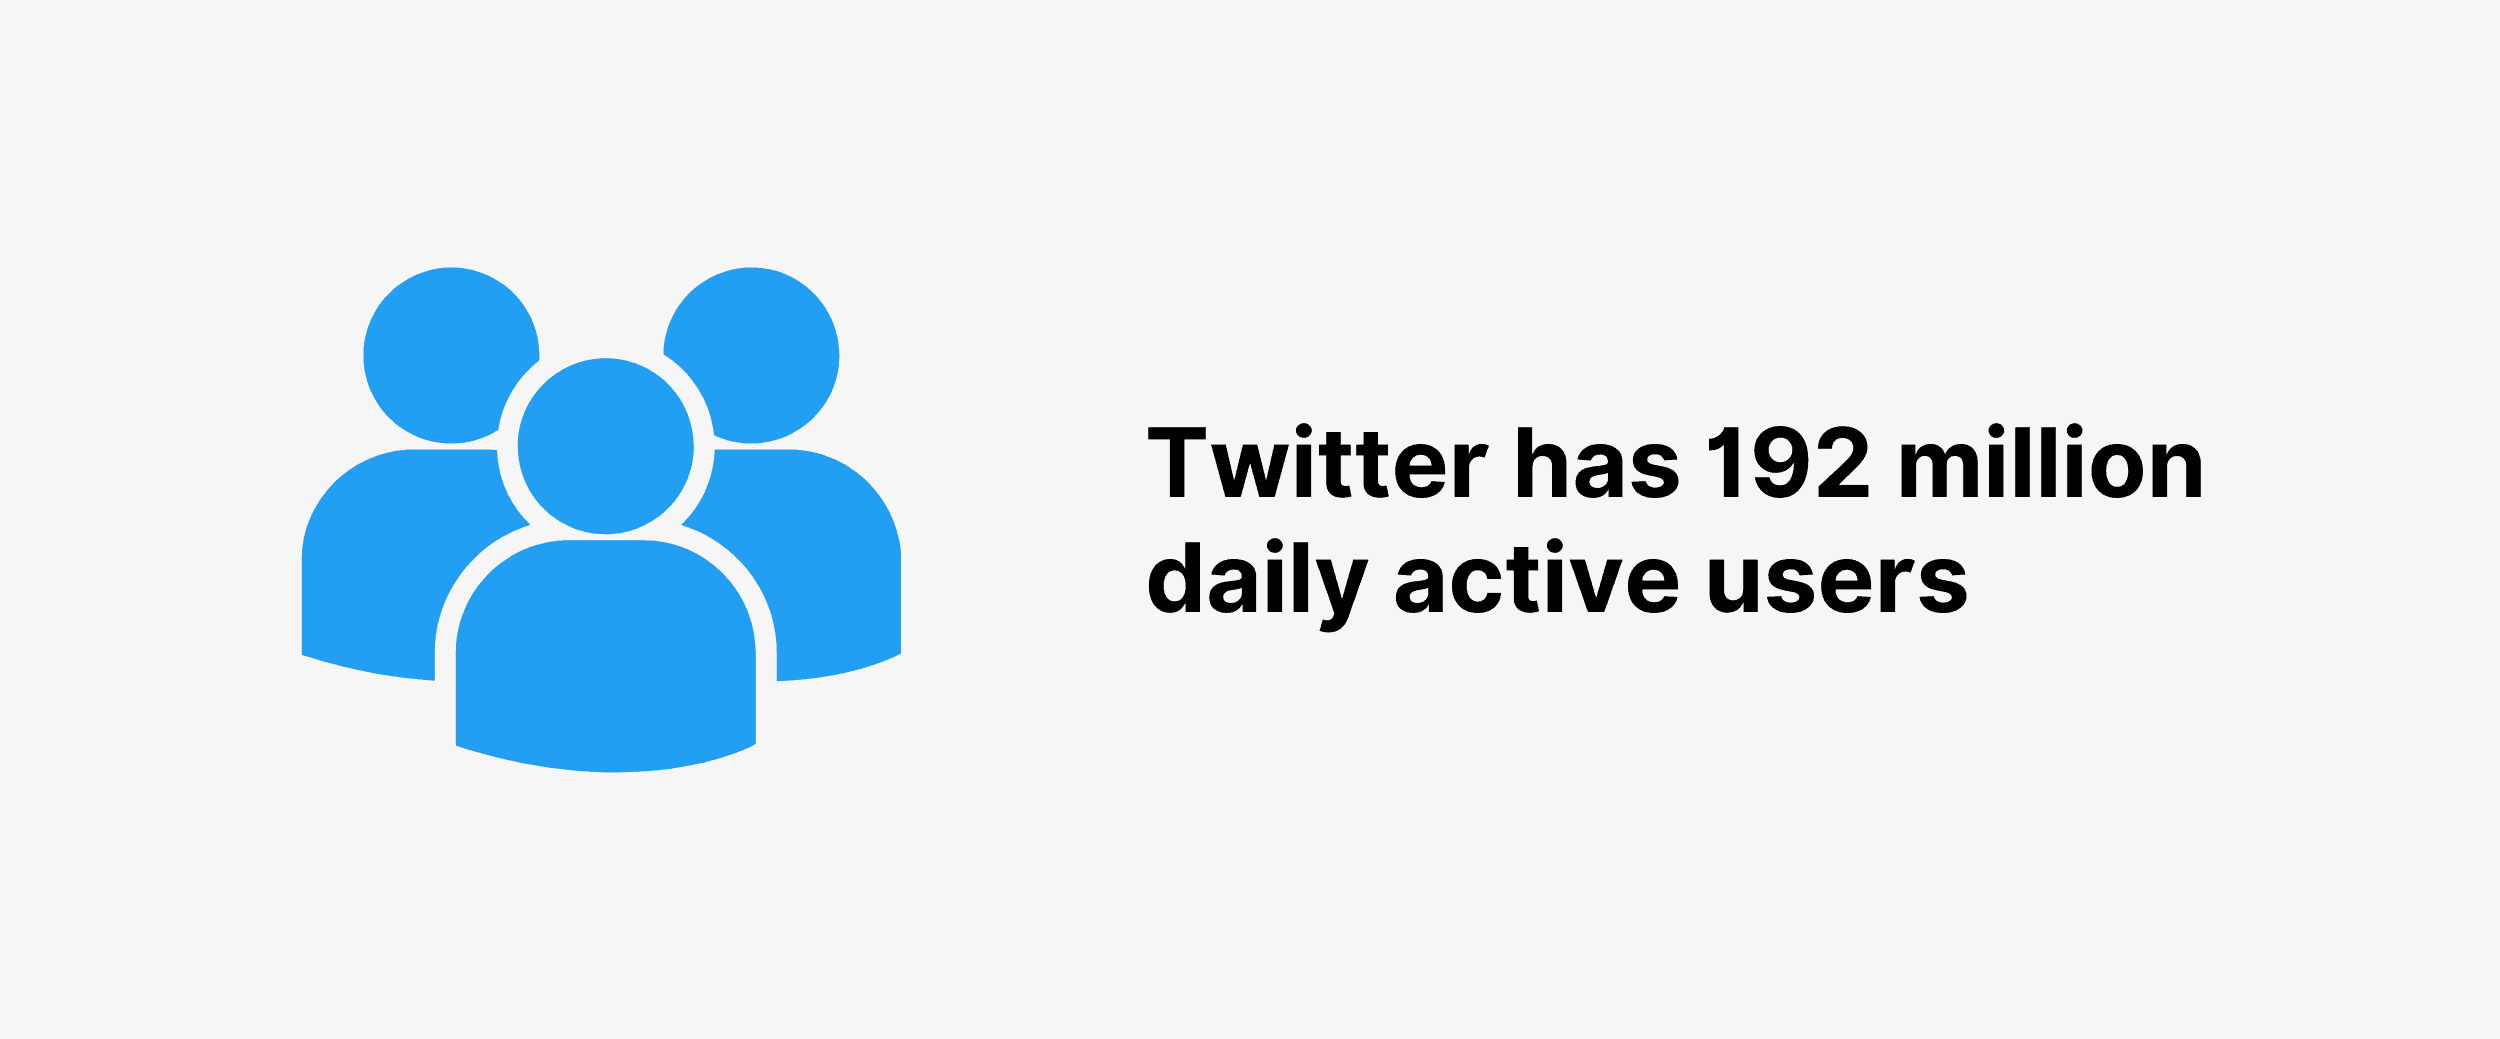 Twitter has 192 million daily active users